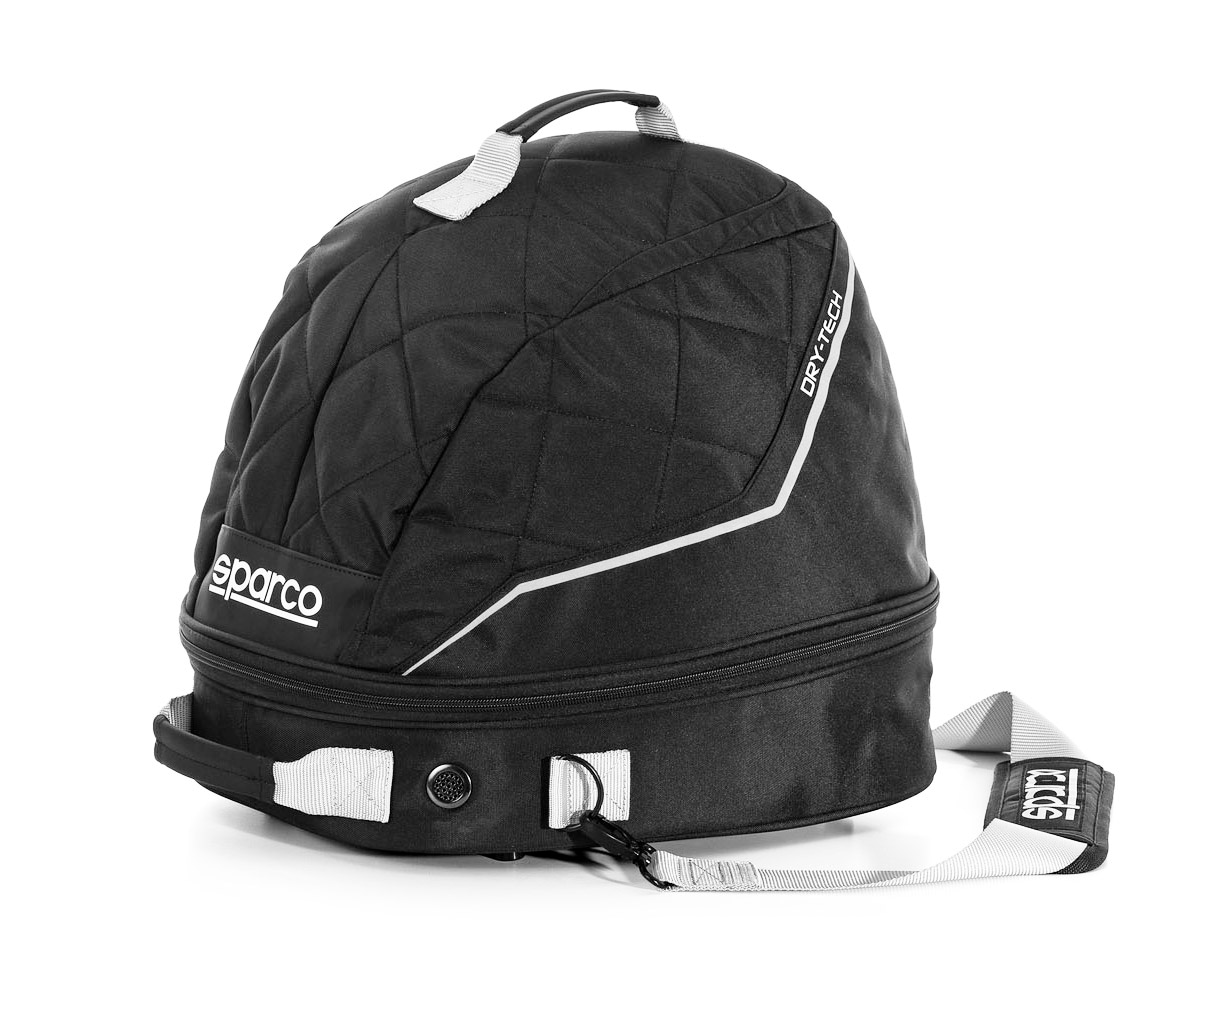 Helmet bag Sparco Dry-Tech with fan system